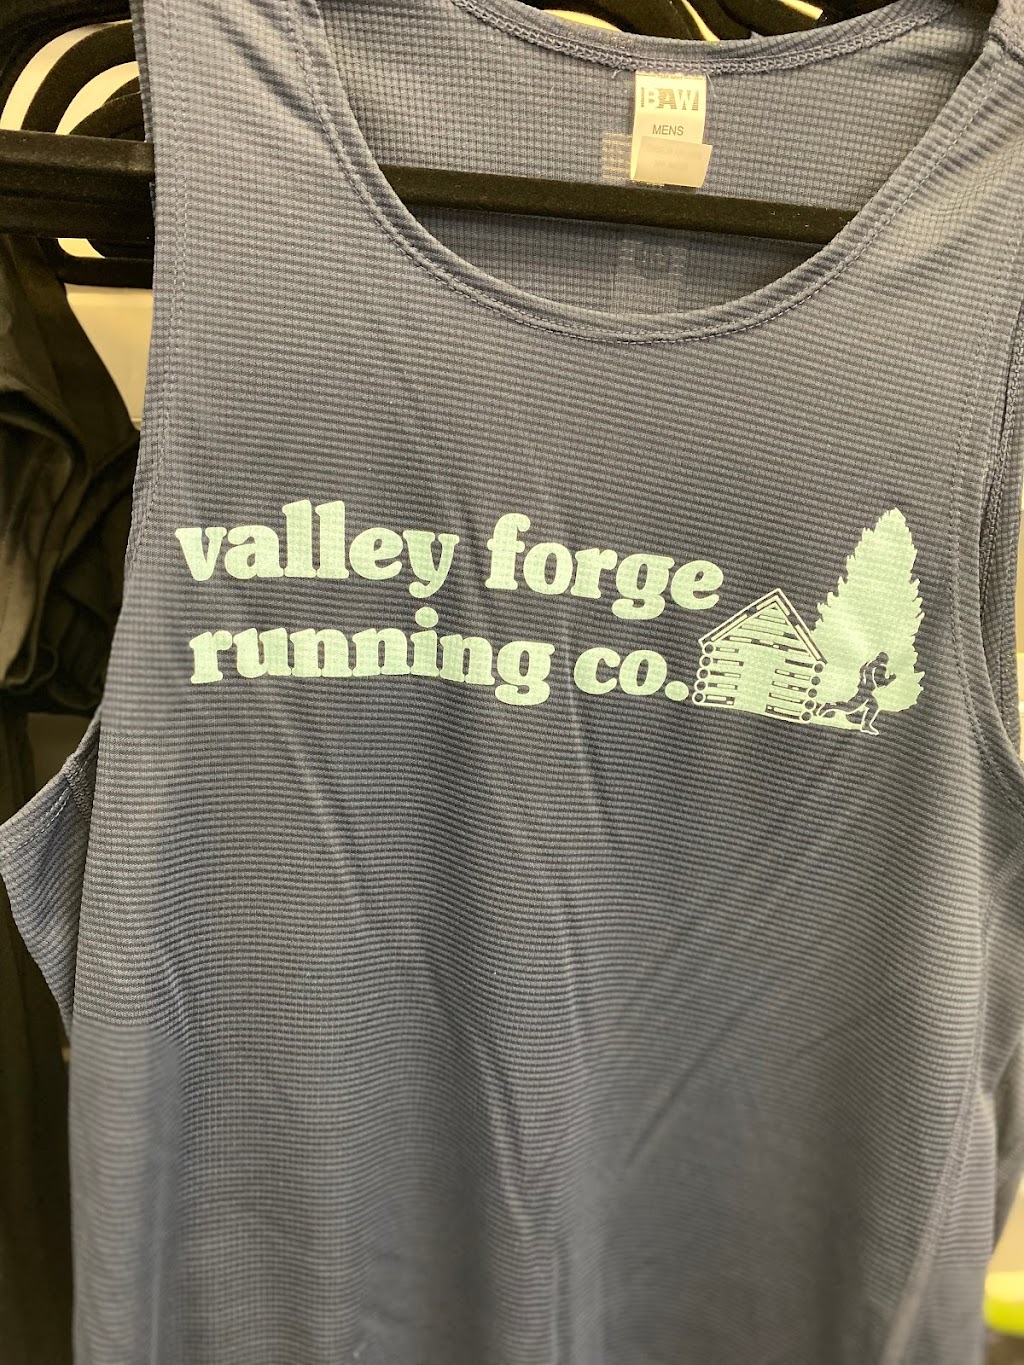 Valley Forge Running Co. | 428 Swedesford Rd, Berwyn, PA 19312 | Phone: (610) 296-2868